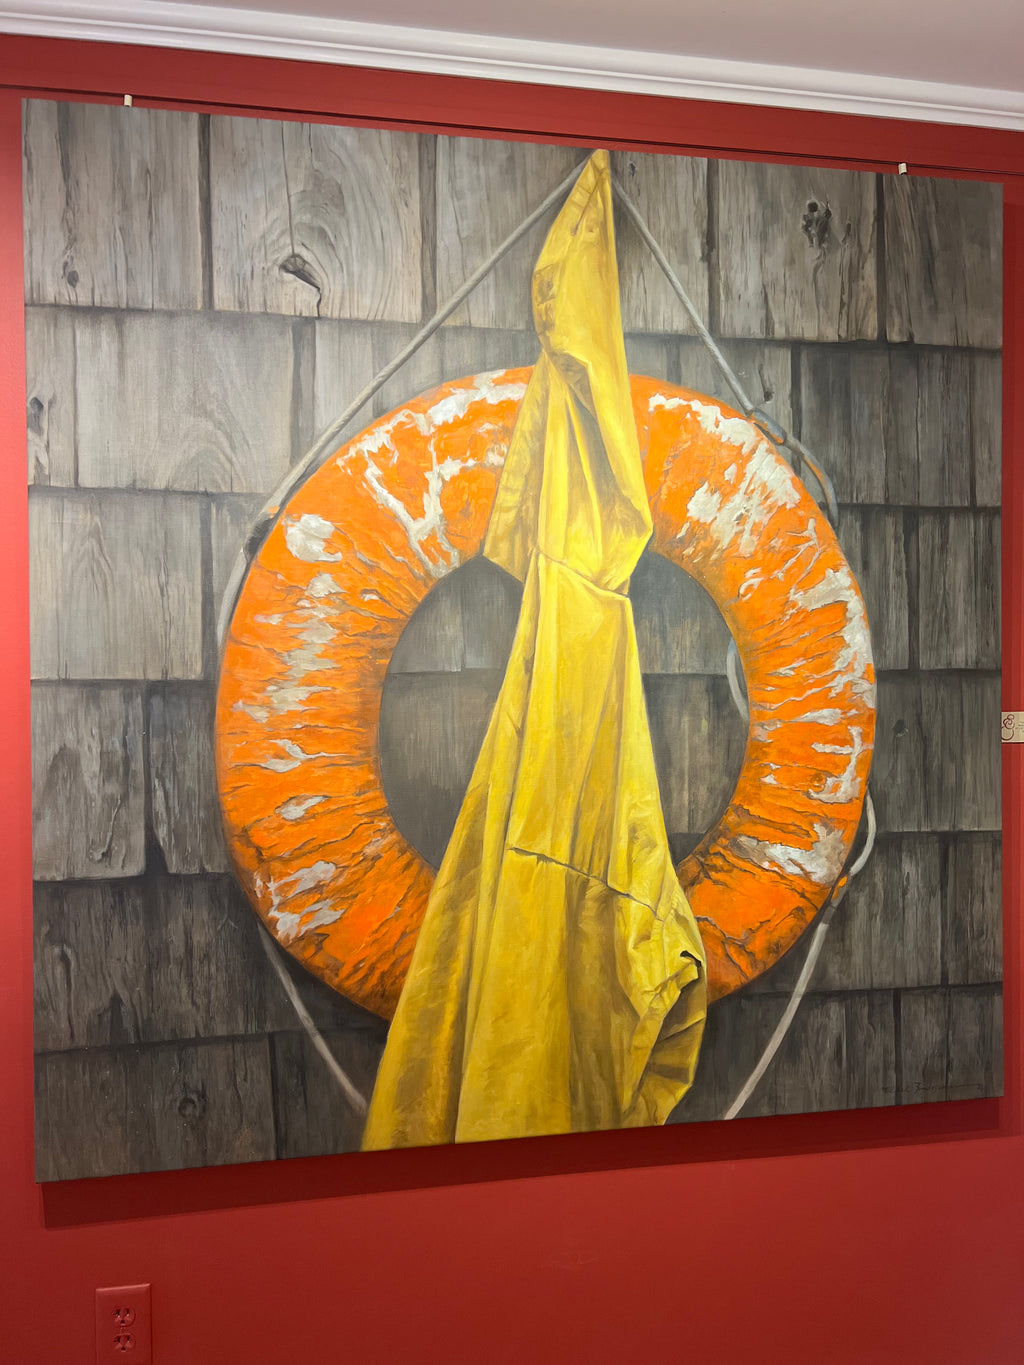 Nautical, still life, oil painting of worn down orange life buoy and a yellow rainjacket hanging on a dark shingled building wall